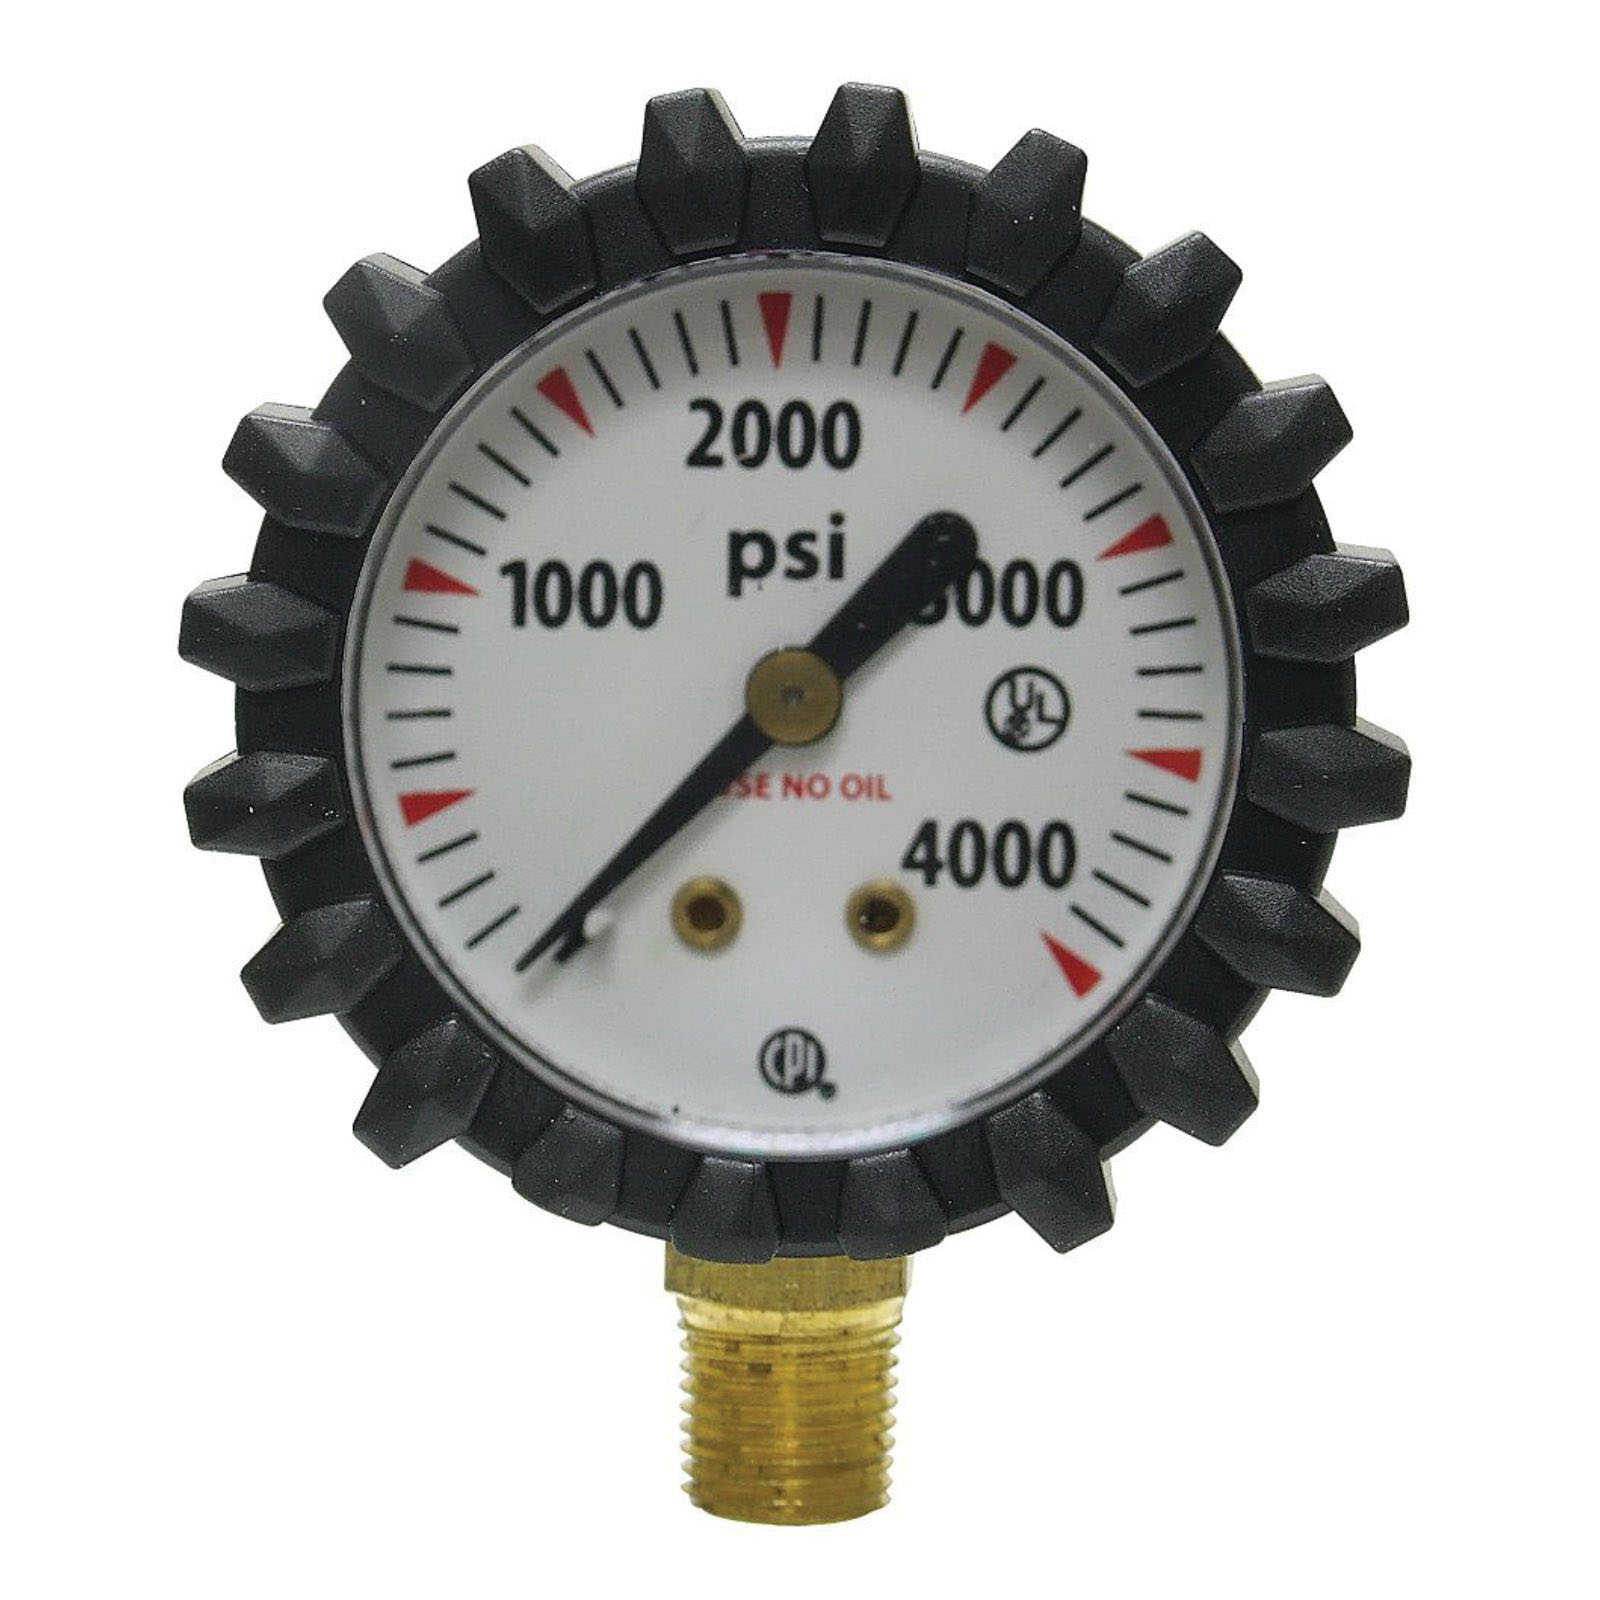 UNIWELD® G56D Replacement Gauge, 1-1/8 in Dial, 0 to 4000 psi Measuring Range, 3-2-3 % Accuracy, 1/8 in Connection